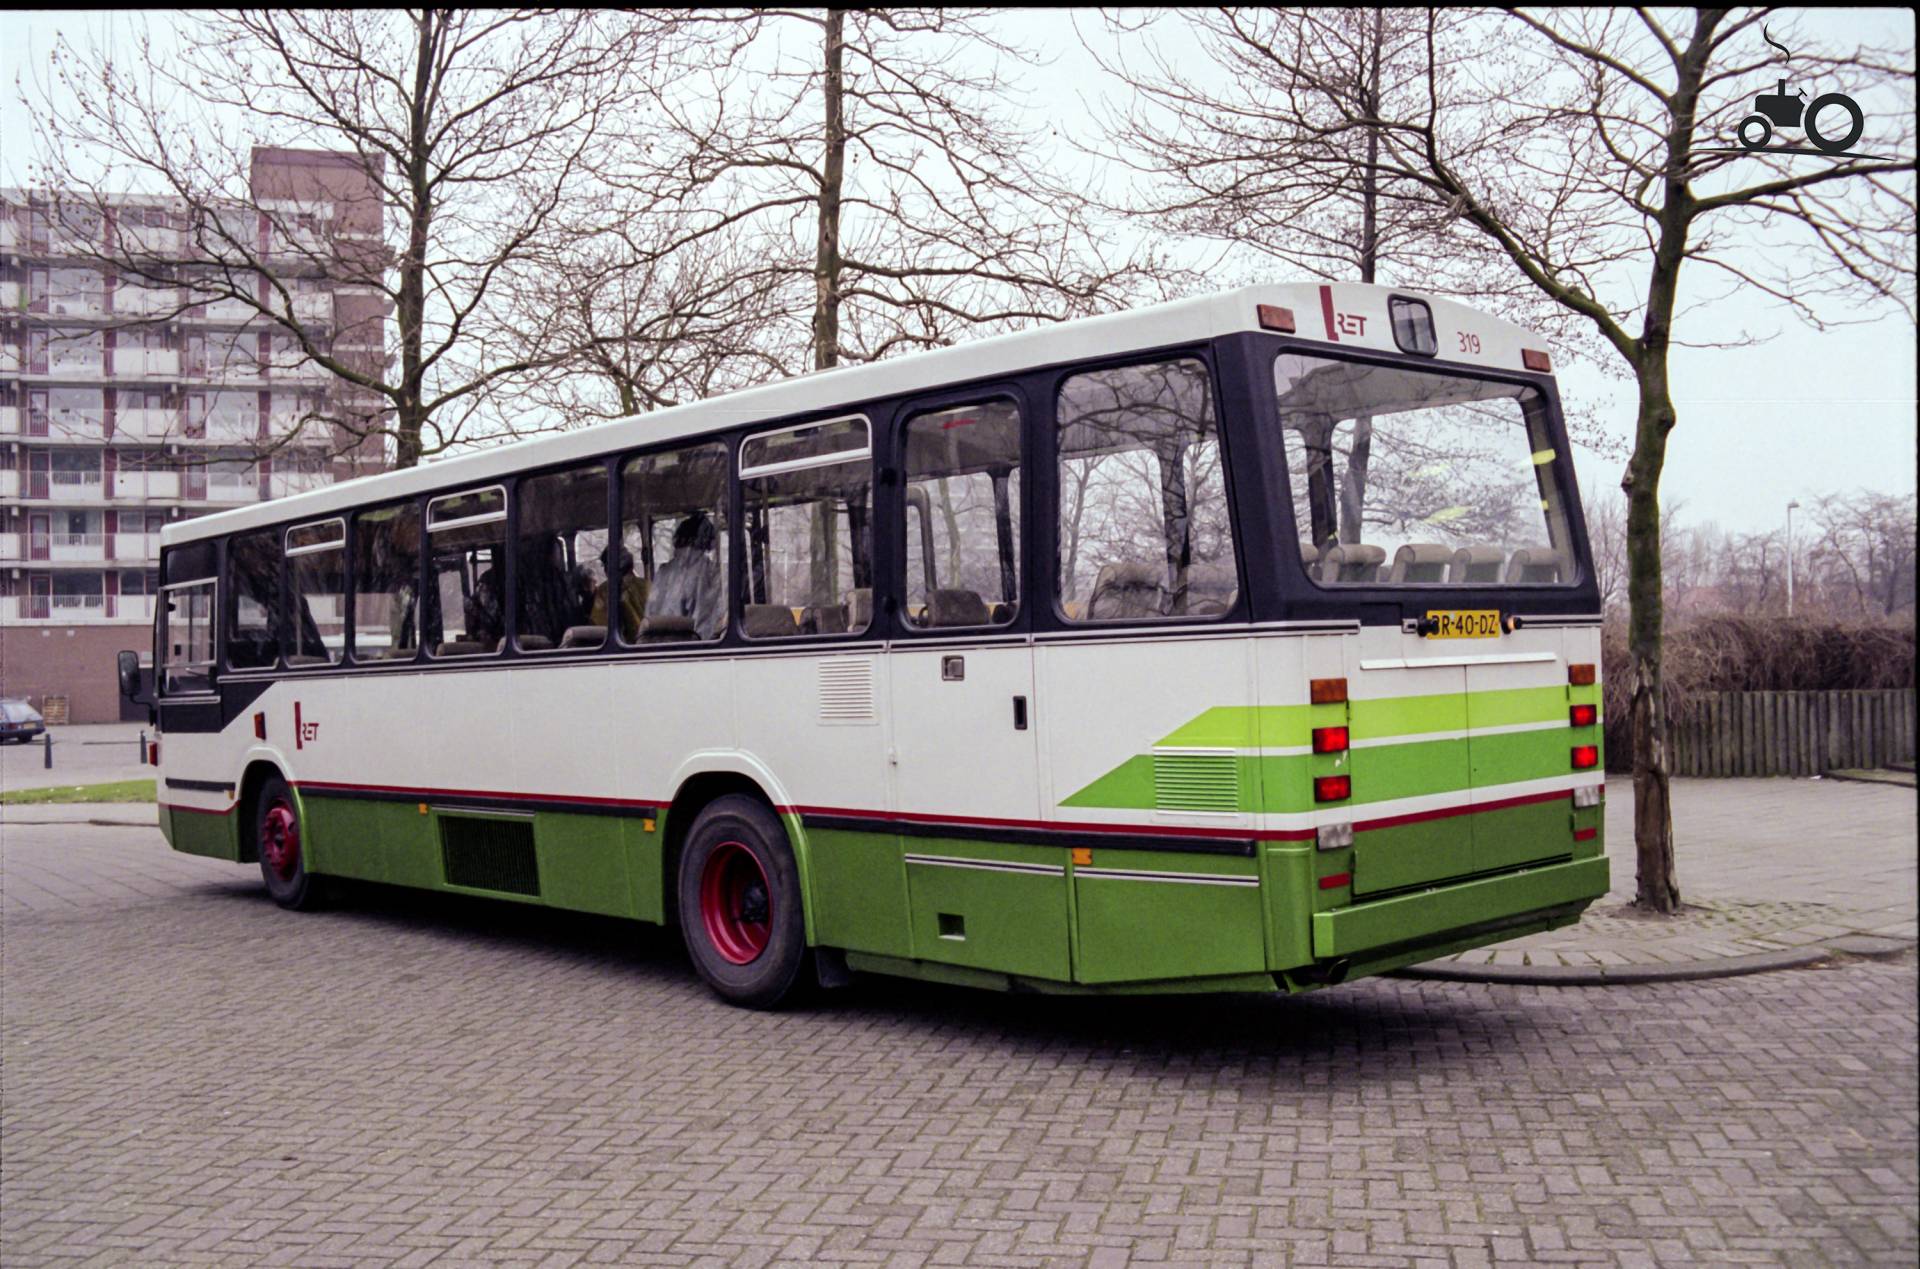 DAF buschassis